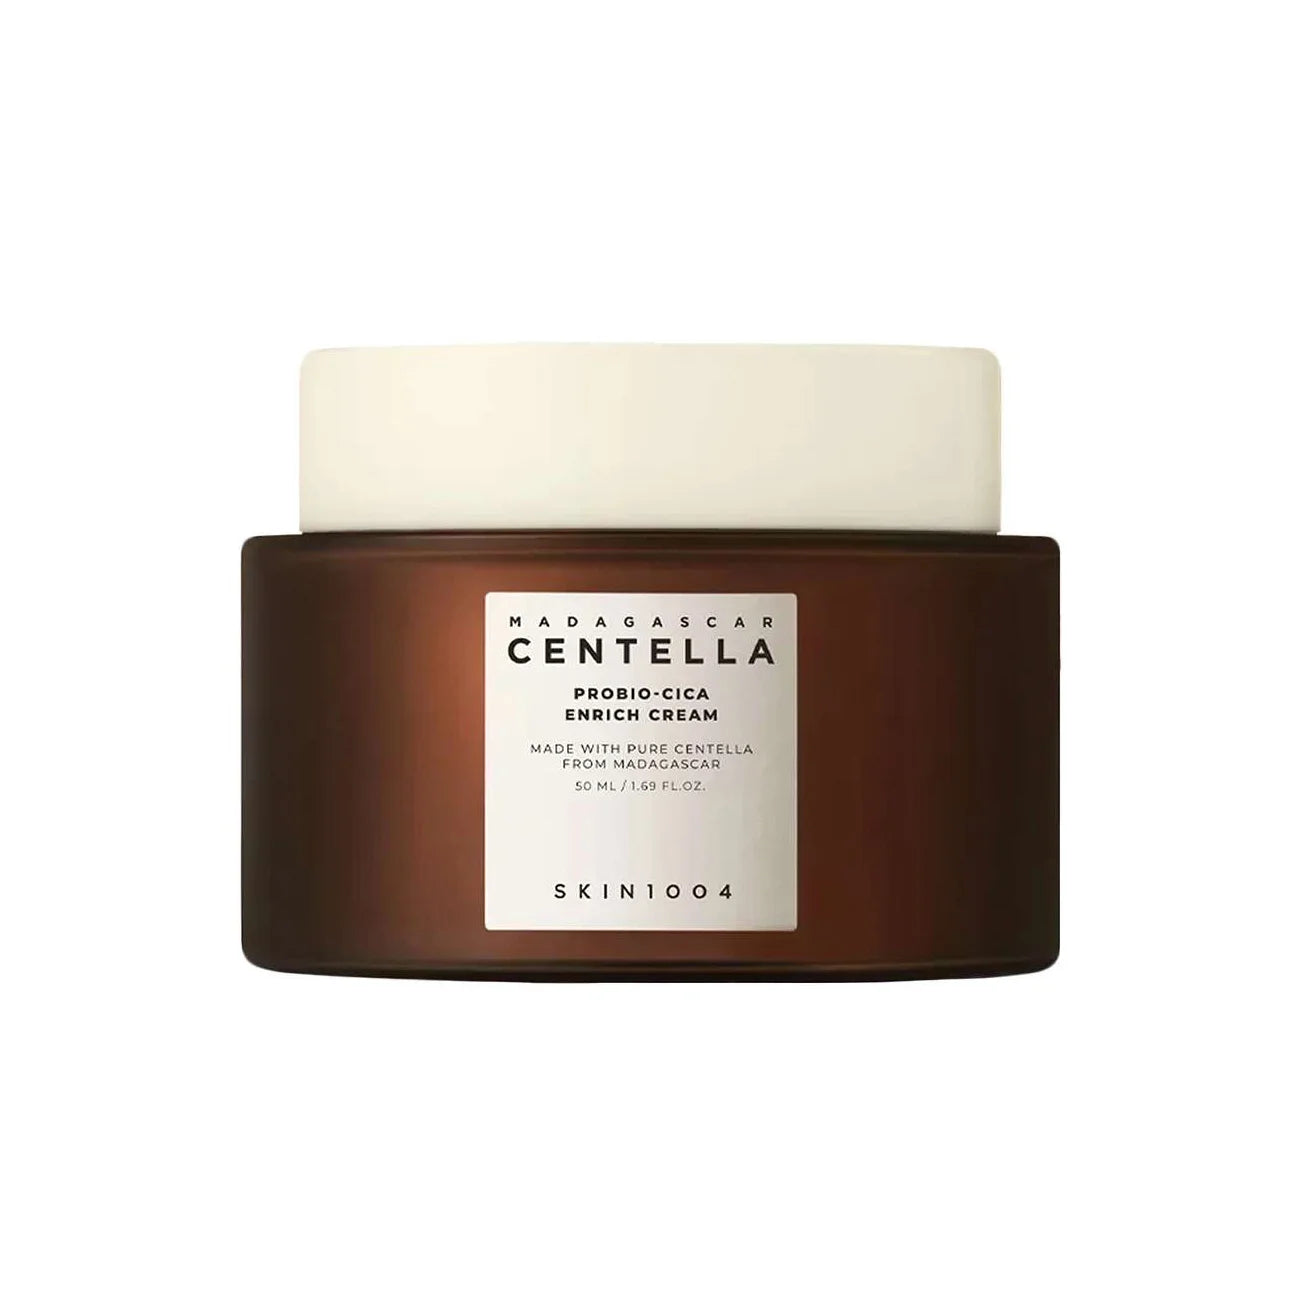 Skin1004 Madagascar Centella Probio-cica Enrich Cream rich thick hydrating nourishing soothing moisturizer anti-aging fine lines wrinkles collegan-boosting K Beauty World 